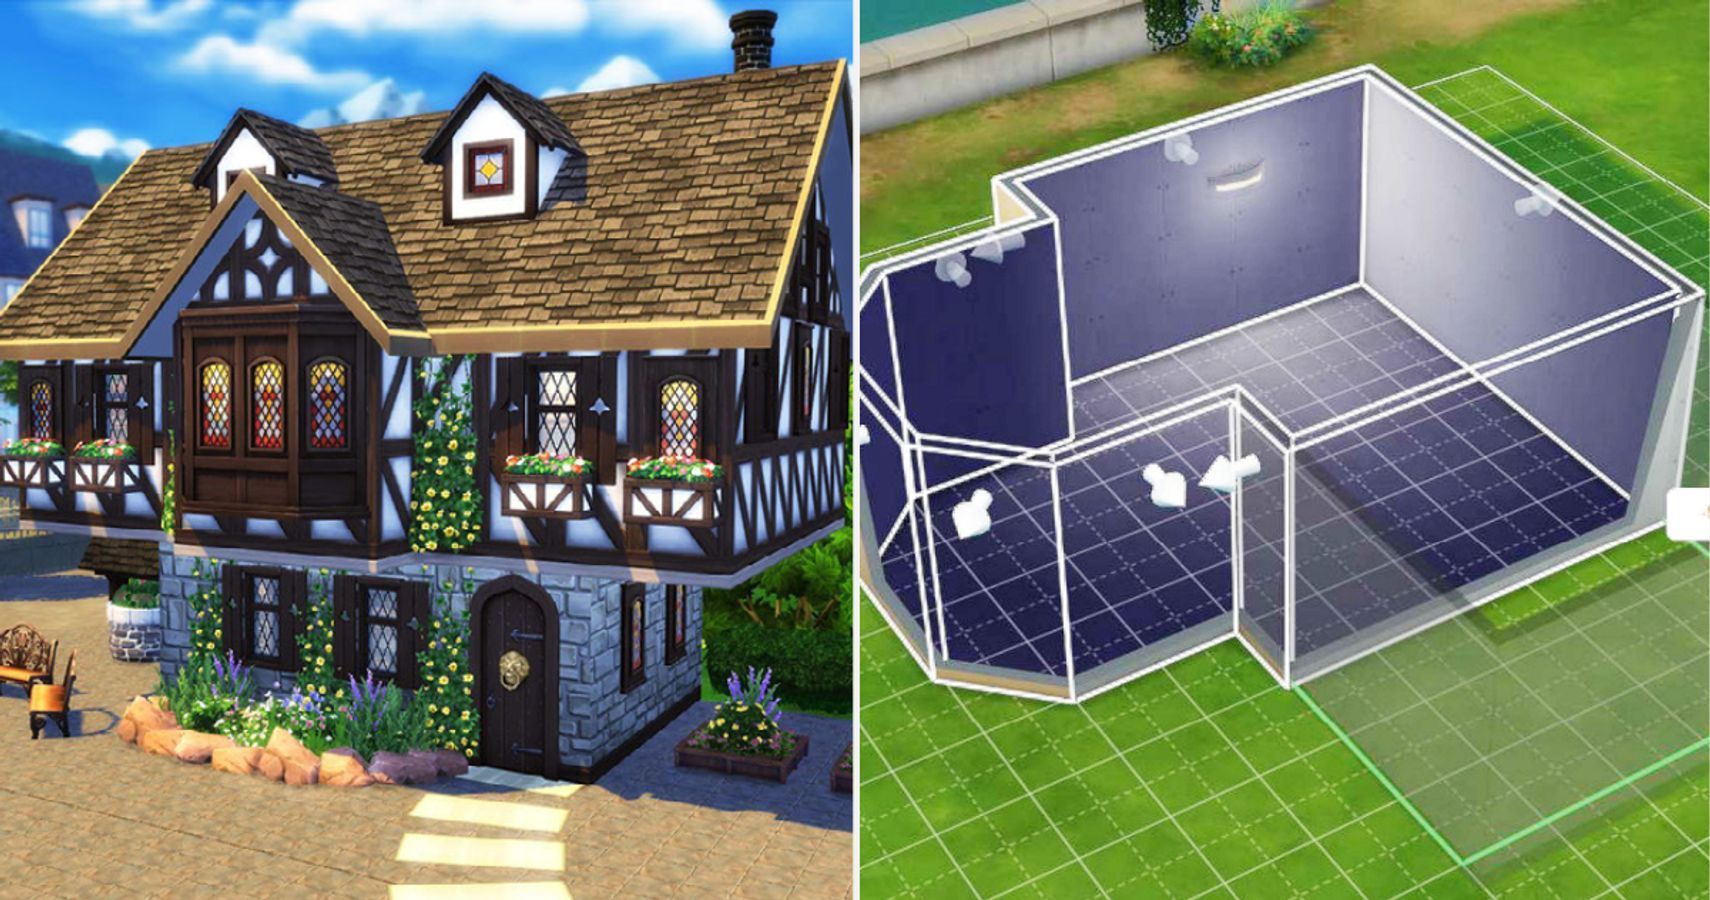 The Sims 4: 15 Ideas To Take Your Houses To The Next Level